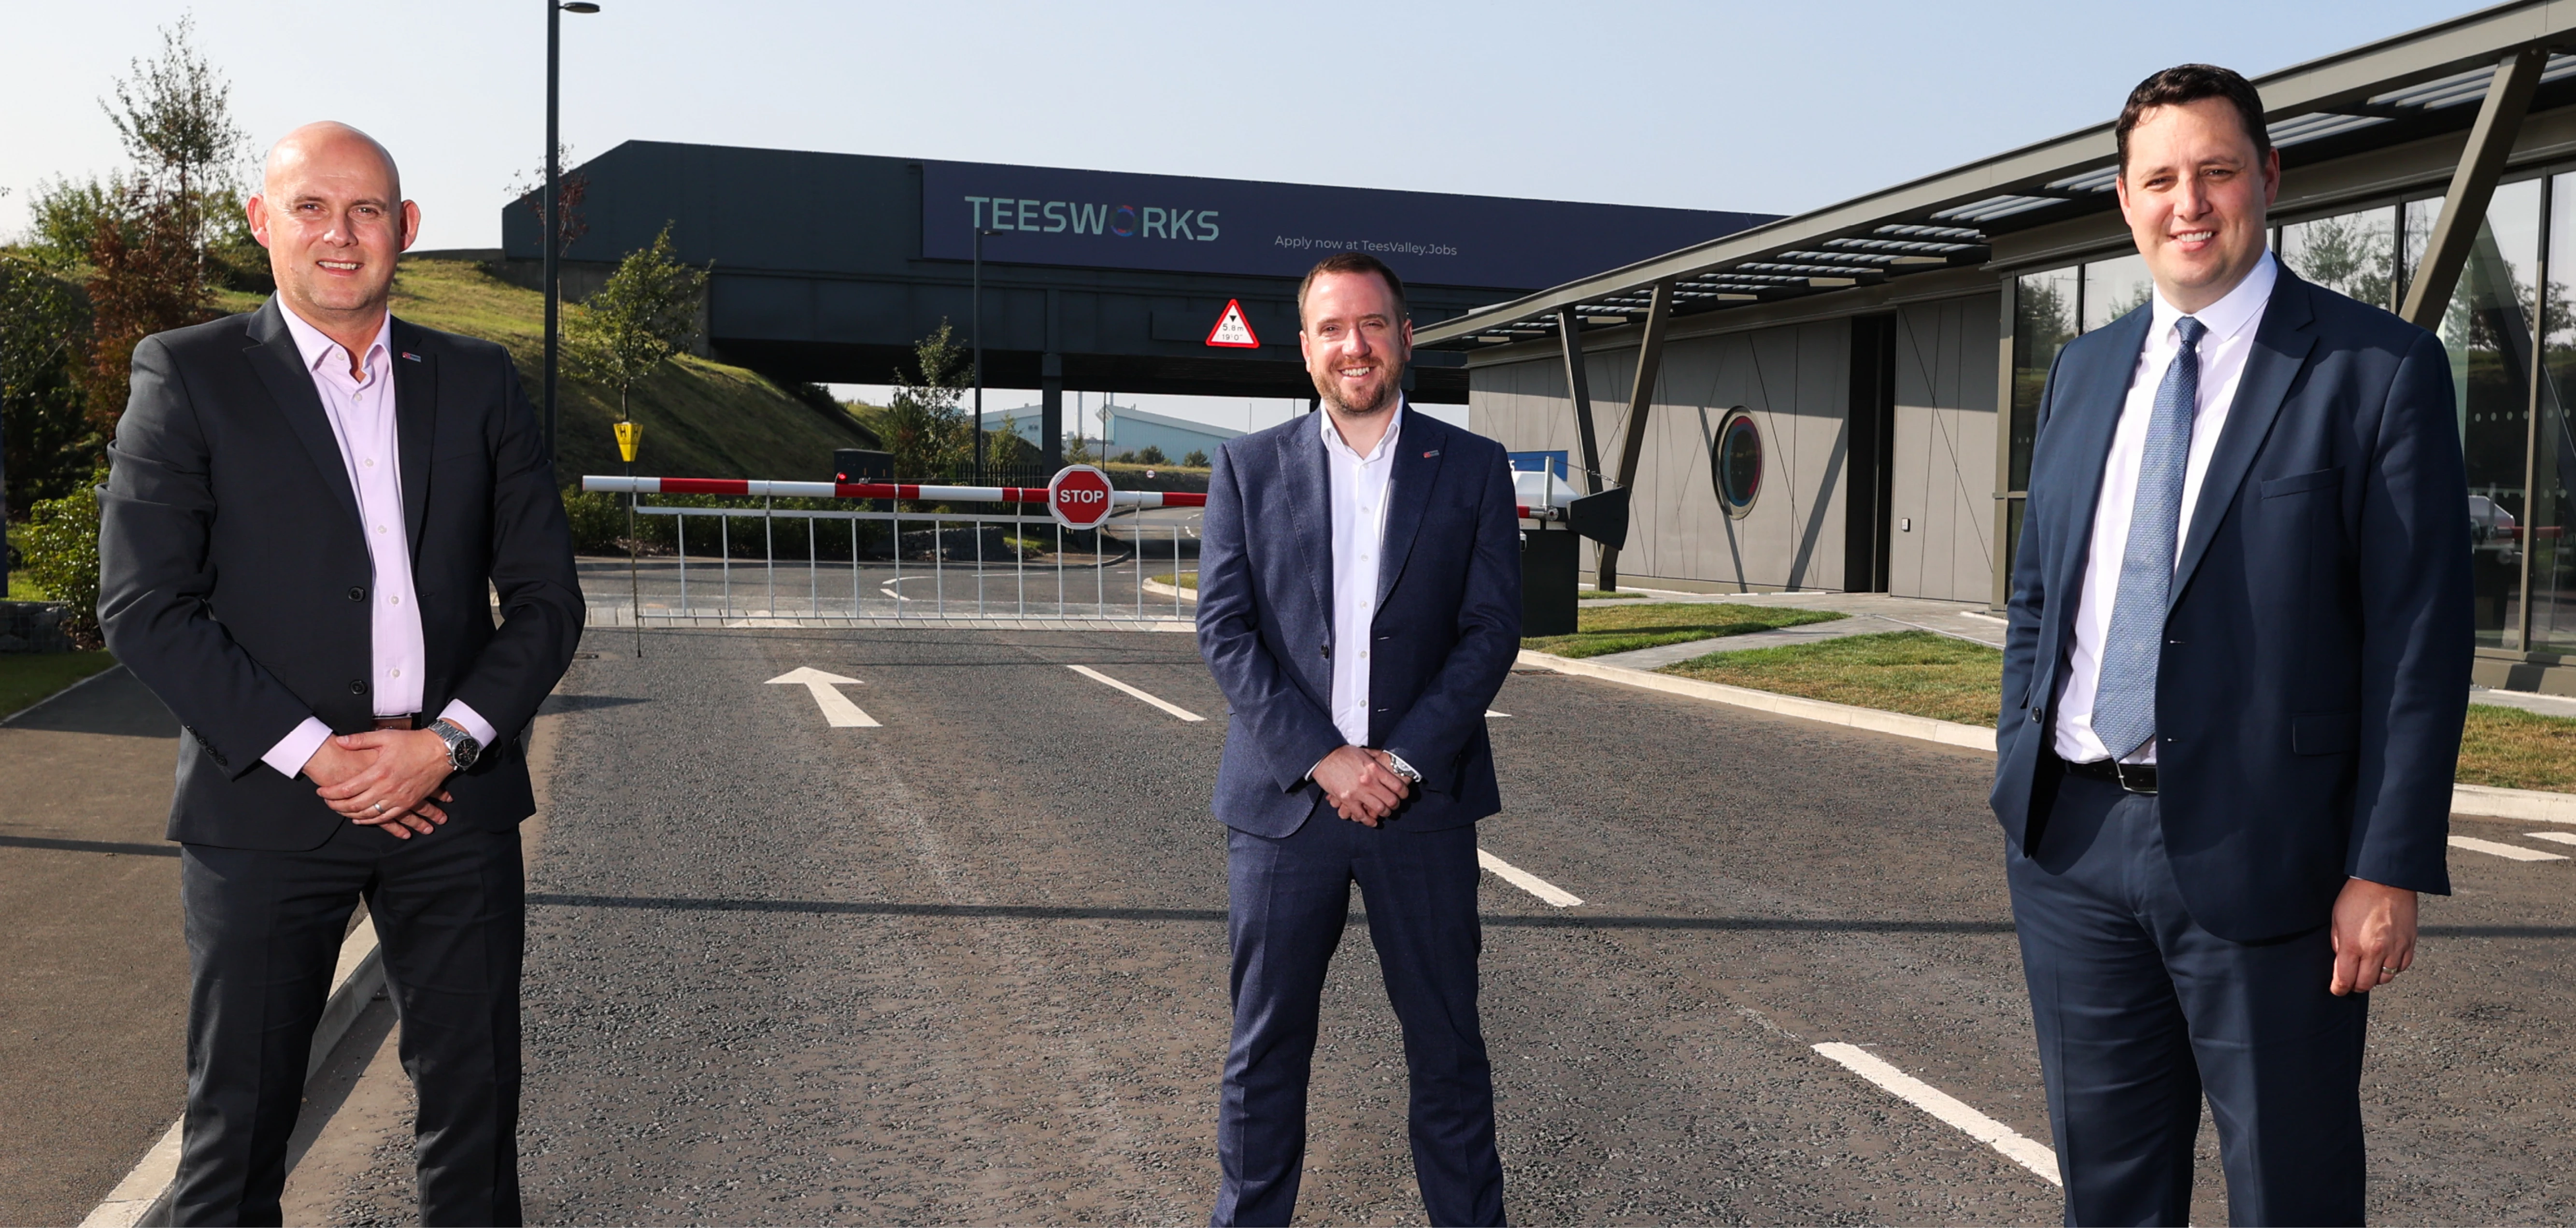 Mayor Ben Houchen welcomes Aspire to Teesside. Mayor Houchen is pictured at Teesworks with Justin Godfrey (Sales Manager, Aspire) and Ben Upton (Head of Product & Solutions, Aspire).